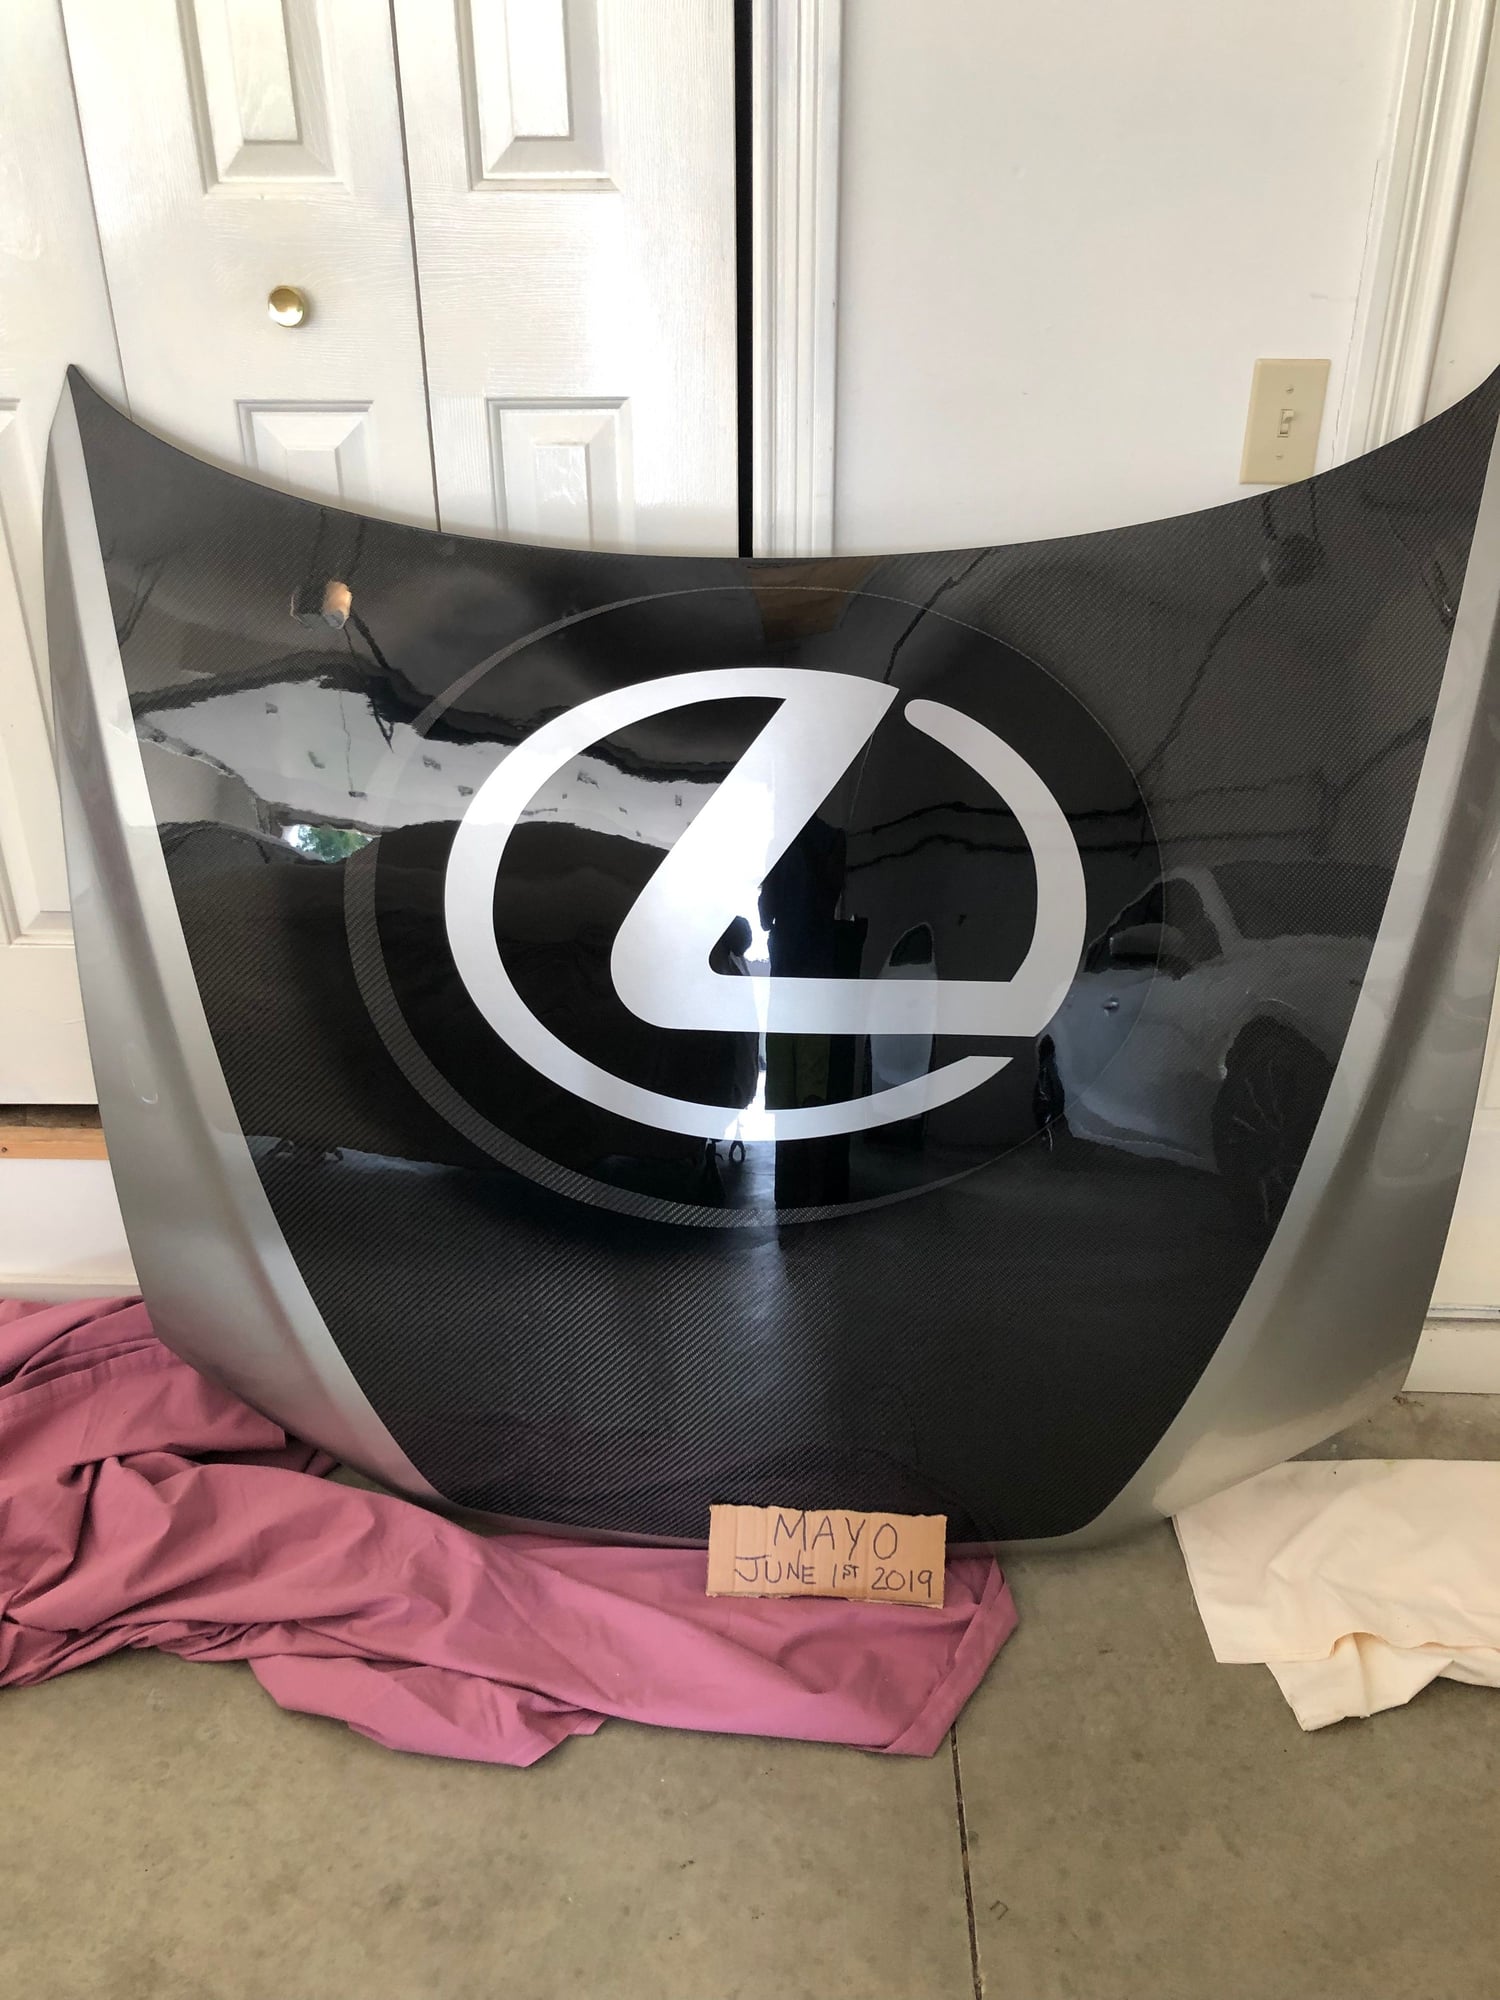 Exterior Body Parts - FS: Custom painted carbon fiber hood - Used - 2001 to 2005 Lexus IS300 - Kokomo, IN 46902, United States